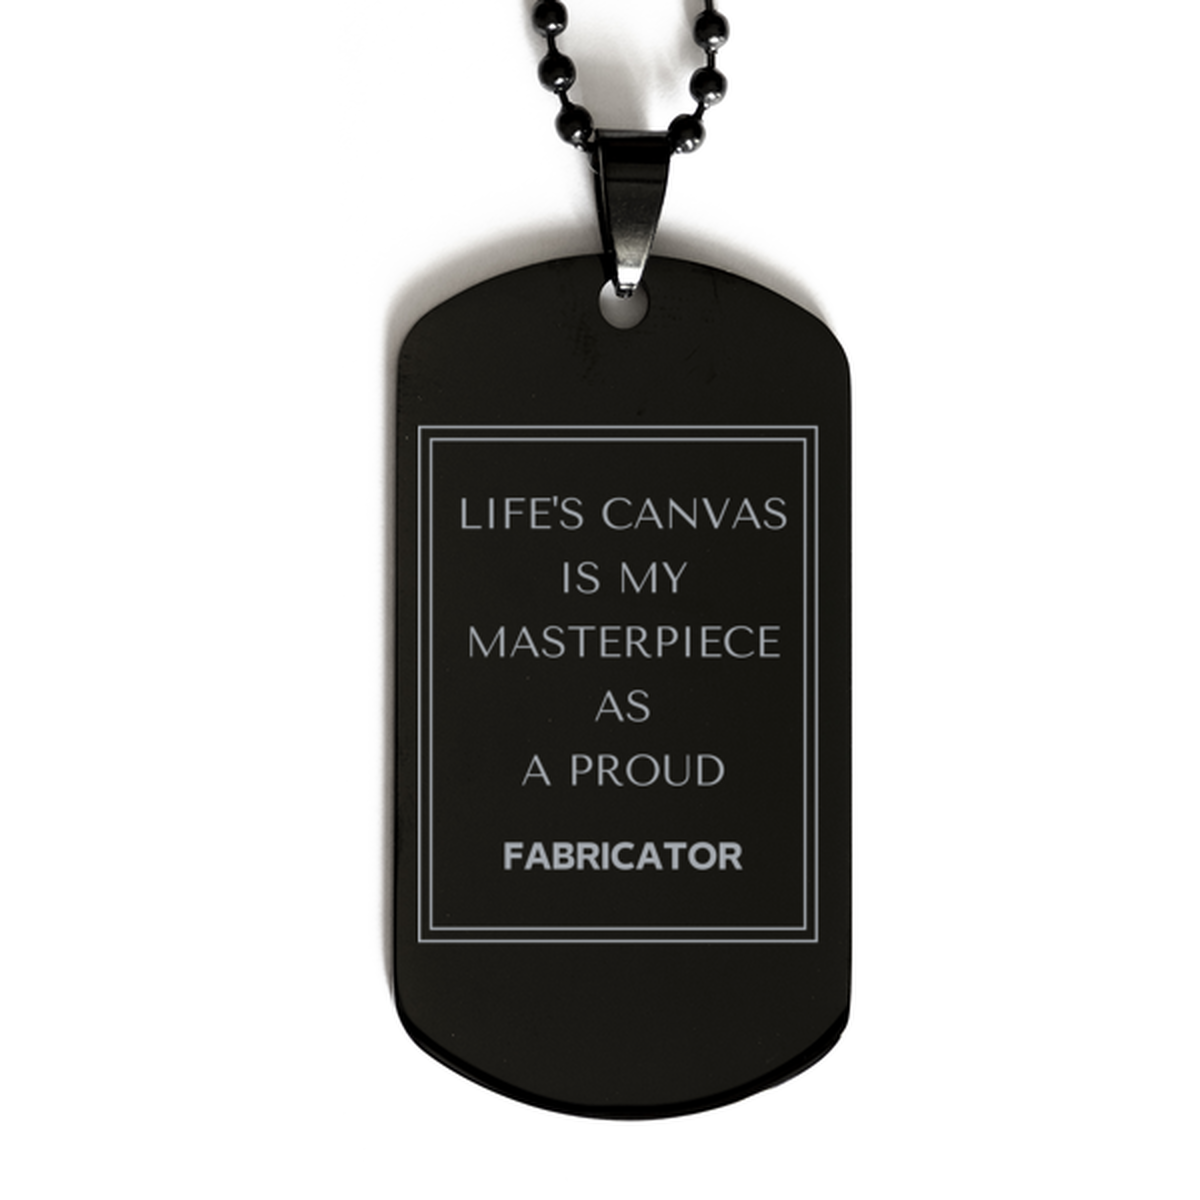 Proud Fabricator Gifts, Life's canvas is my masterpiece, Epic Birthday Christmas Unique Black Dog Tag For Fabricator, Coworkers, Men, Women, Friends